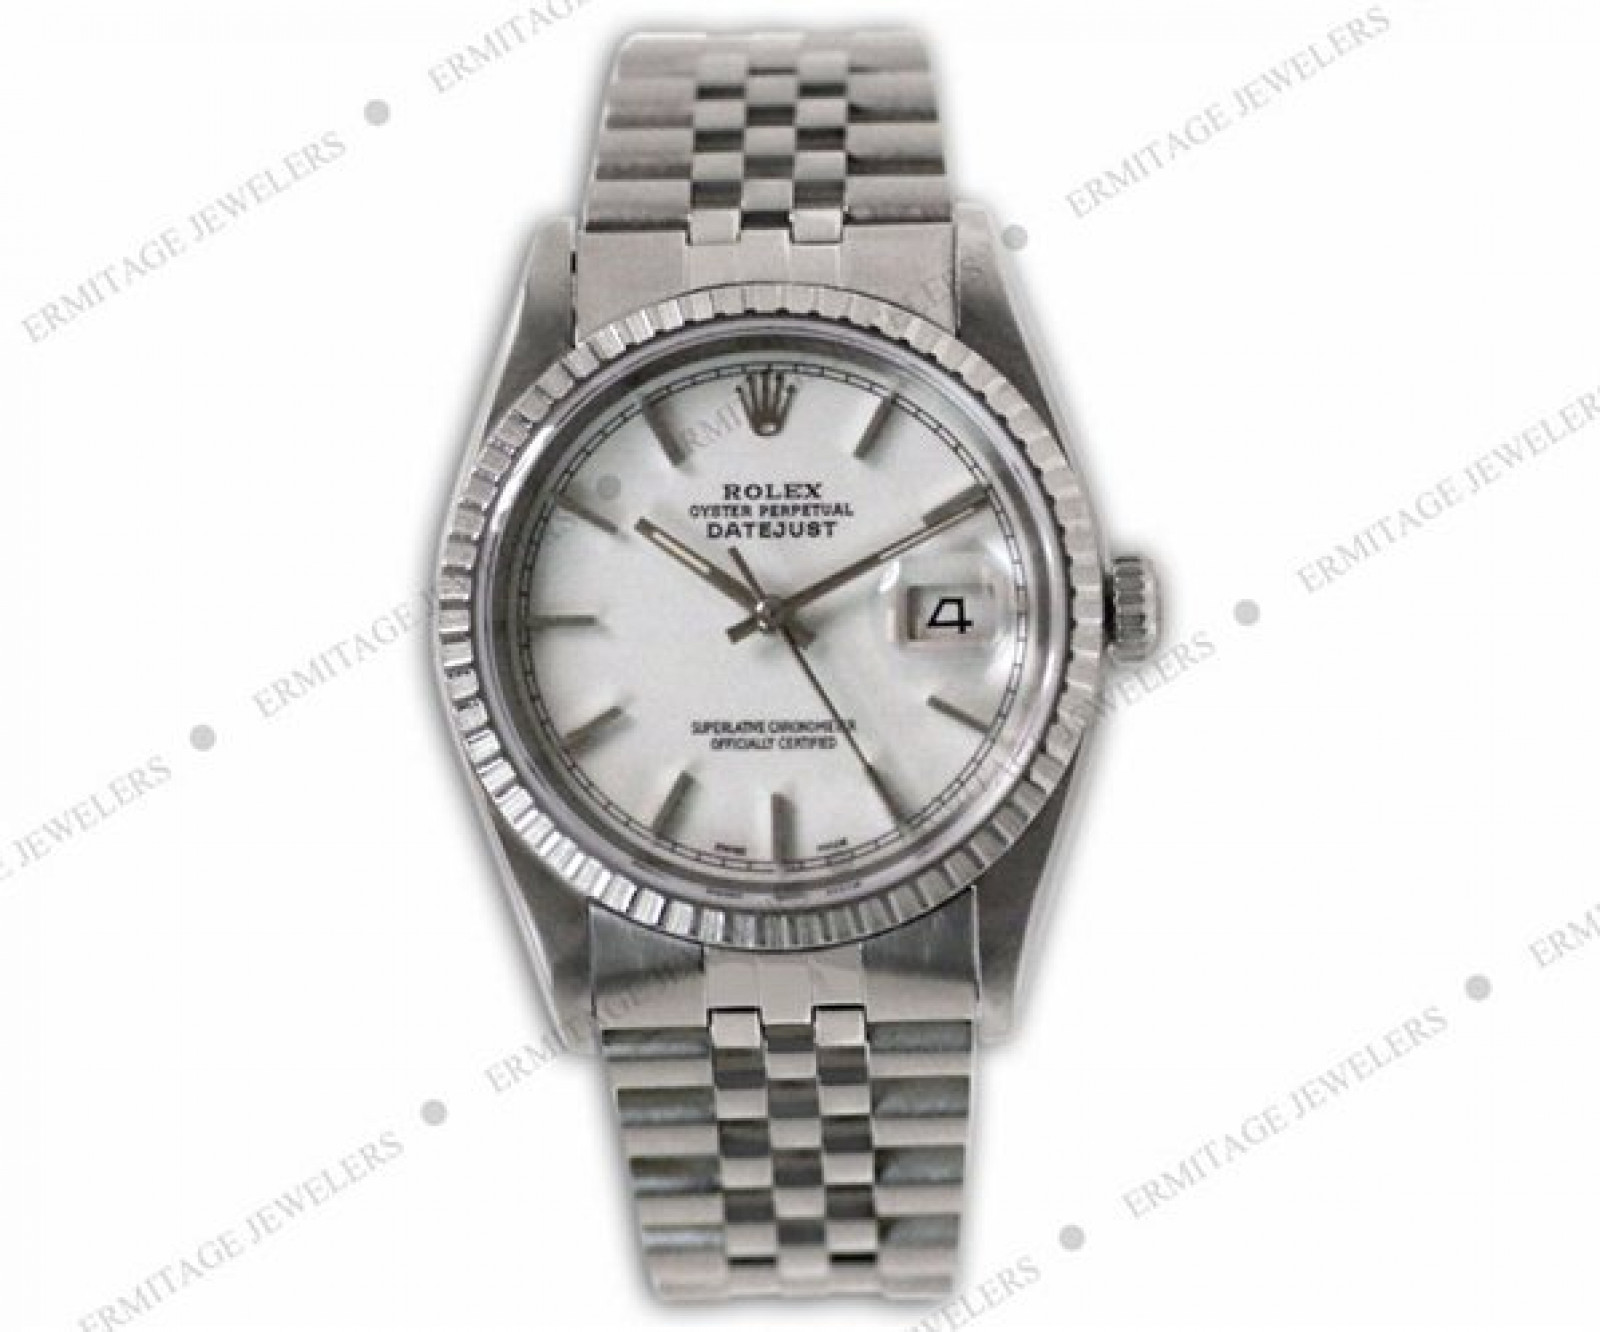 Rolex Datejust 16220 with Stainless Steel